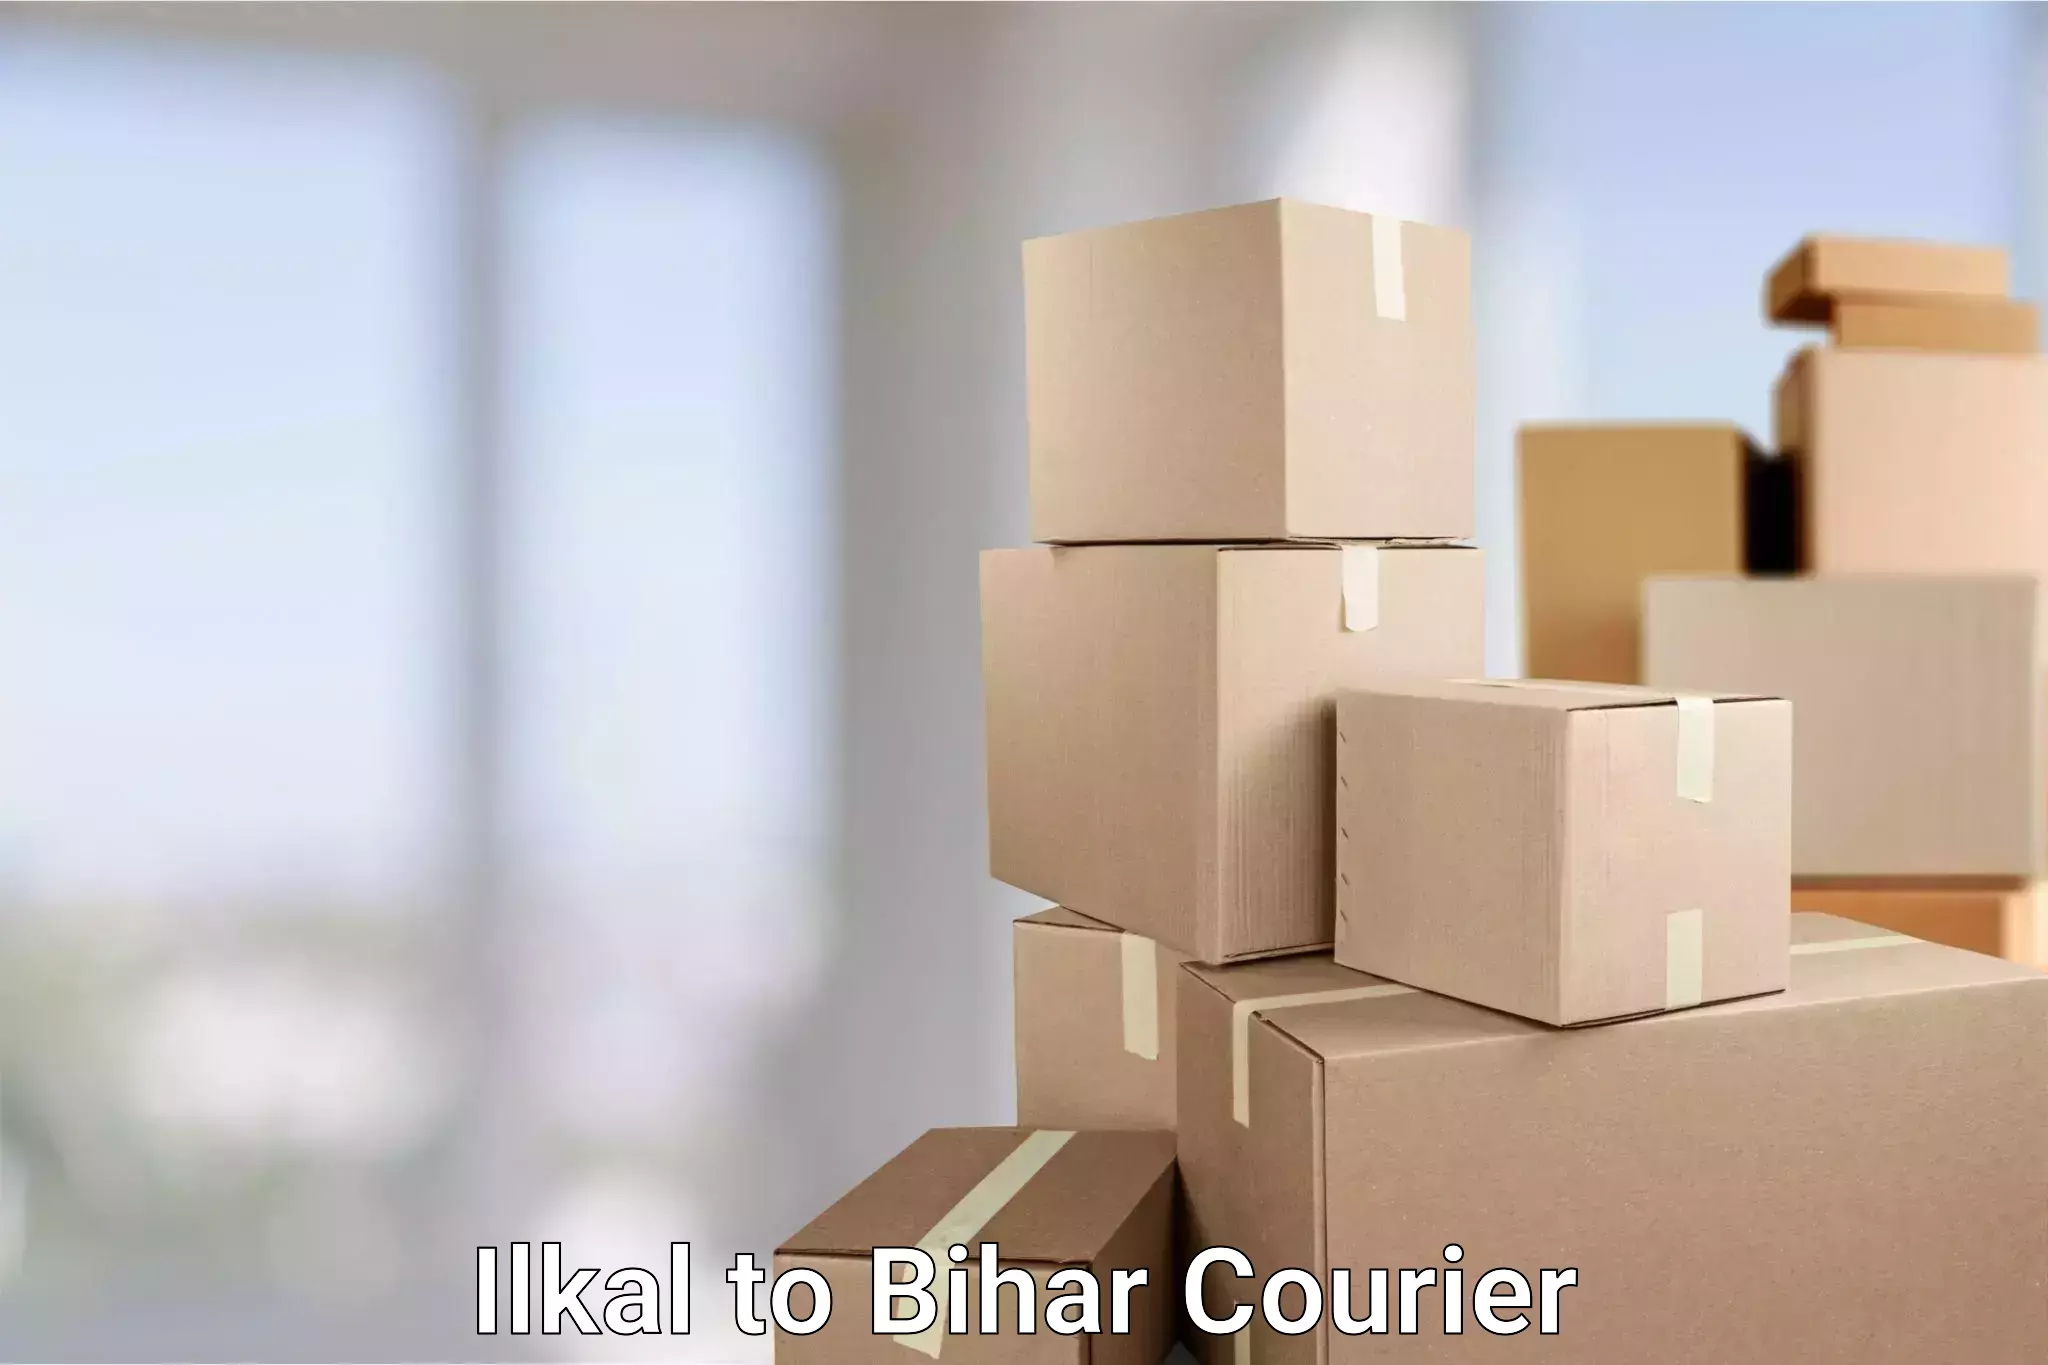 Full-service courier options Ilkal to Barhiya